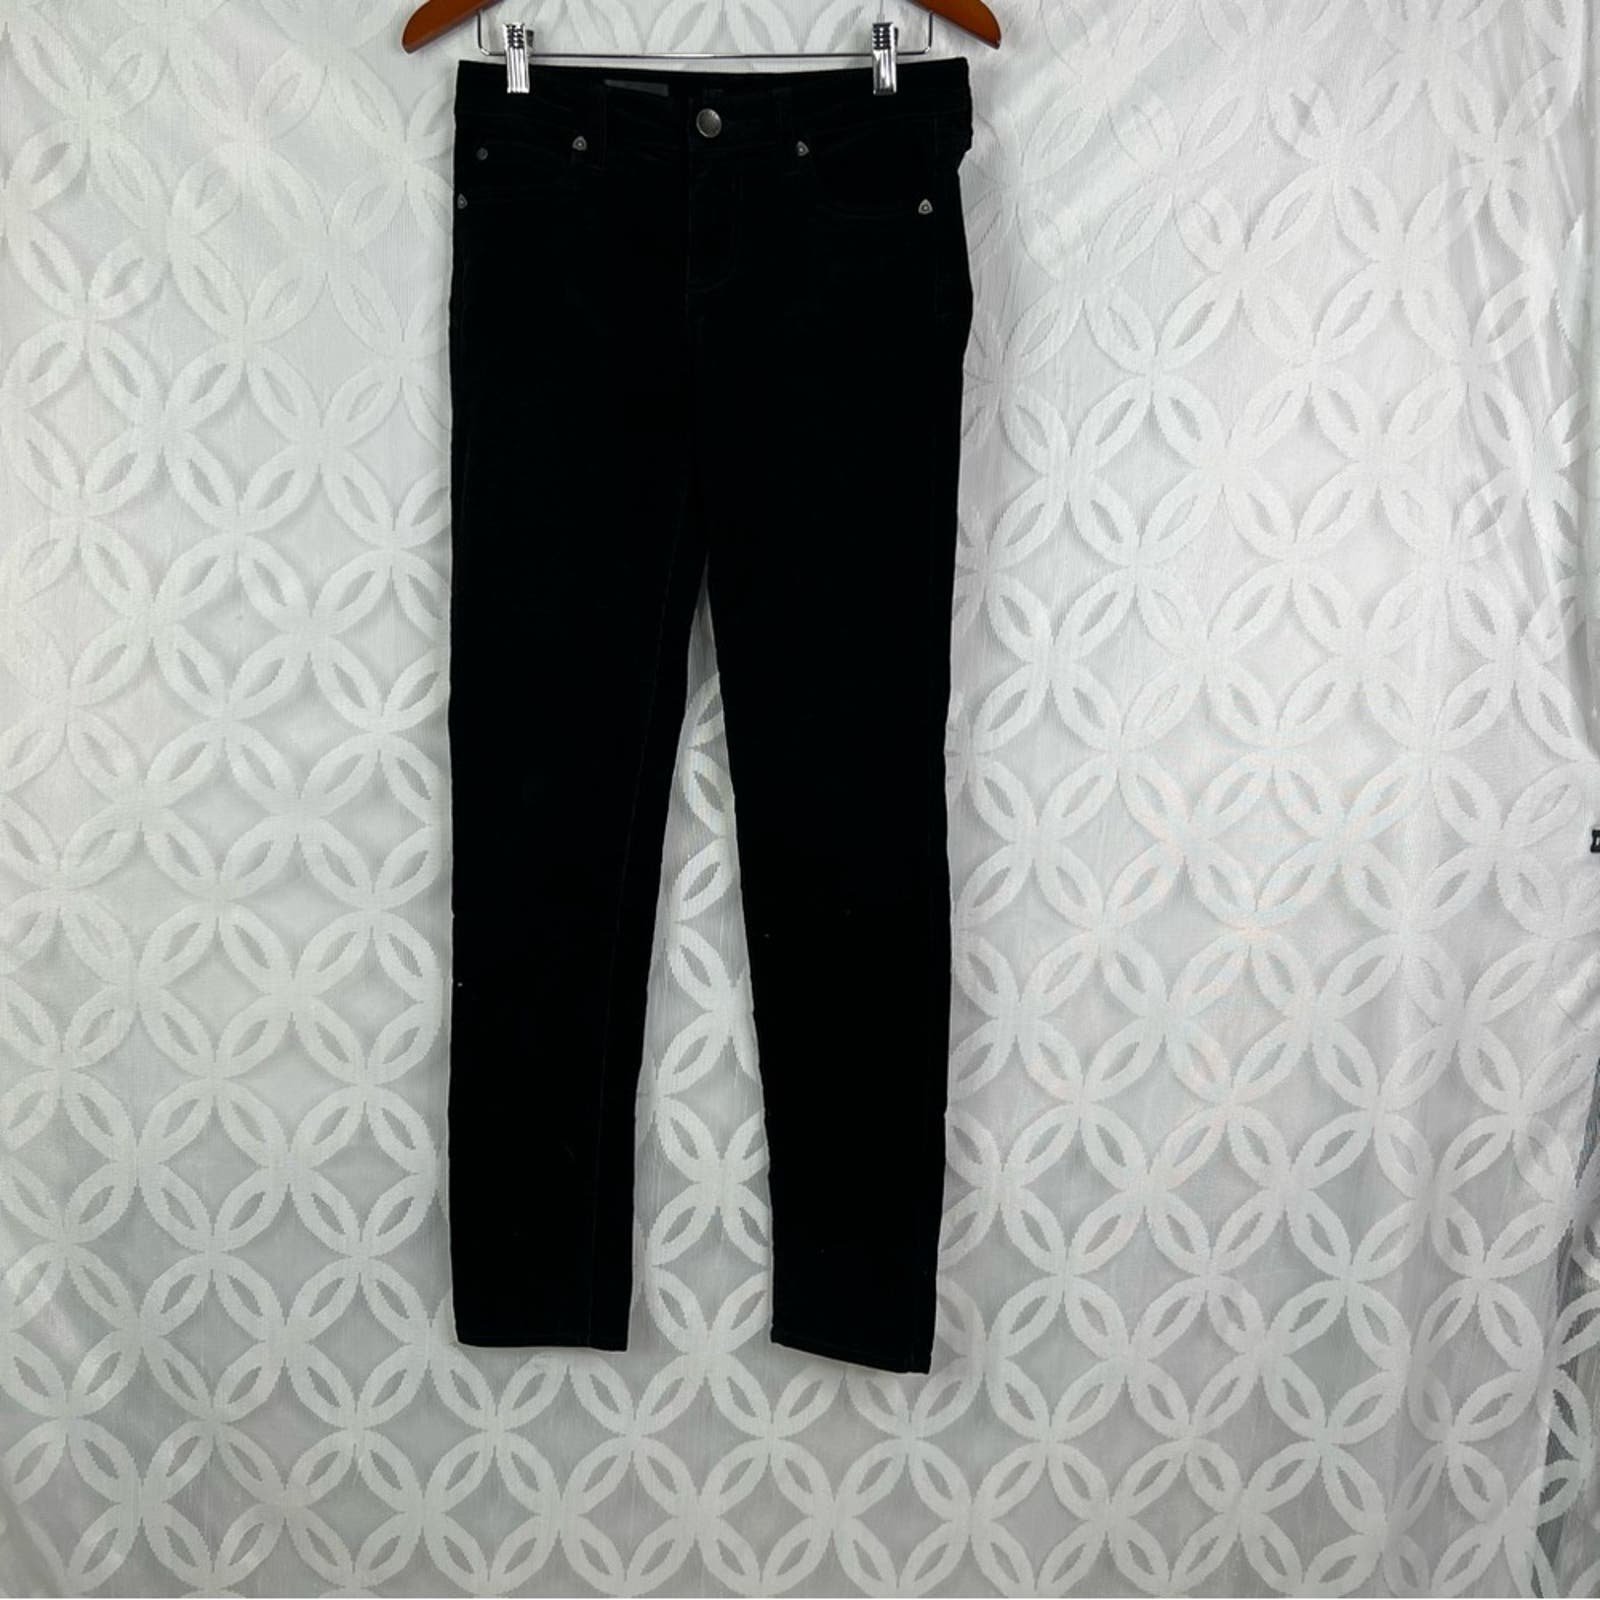 Kut from the Kloth Diana Corduroy Skinny Black Ankle Pants Size 4 FB4iBs4D7